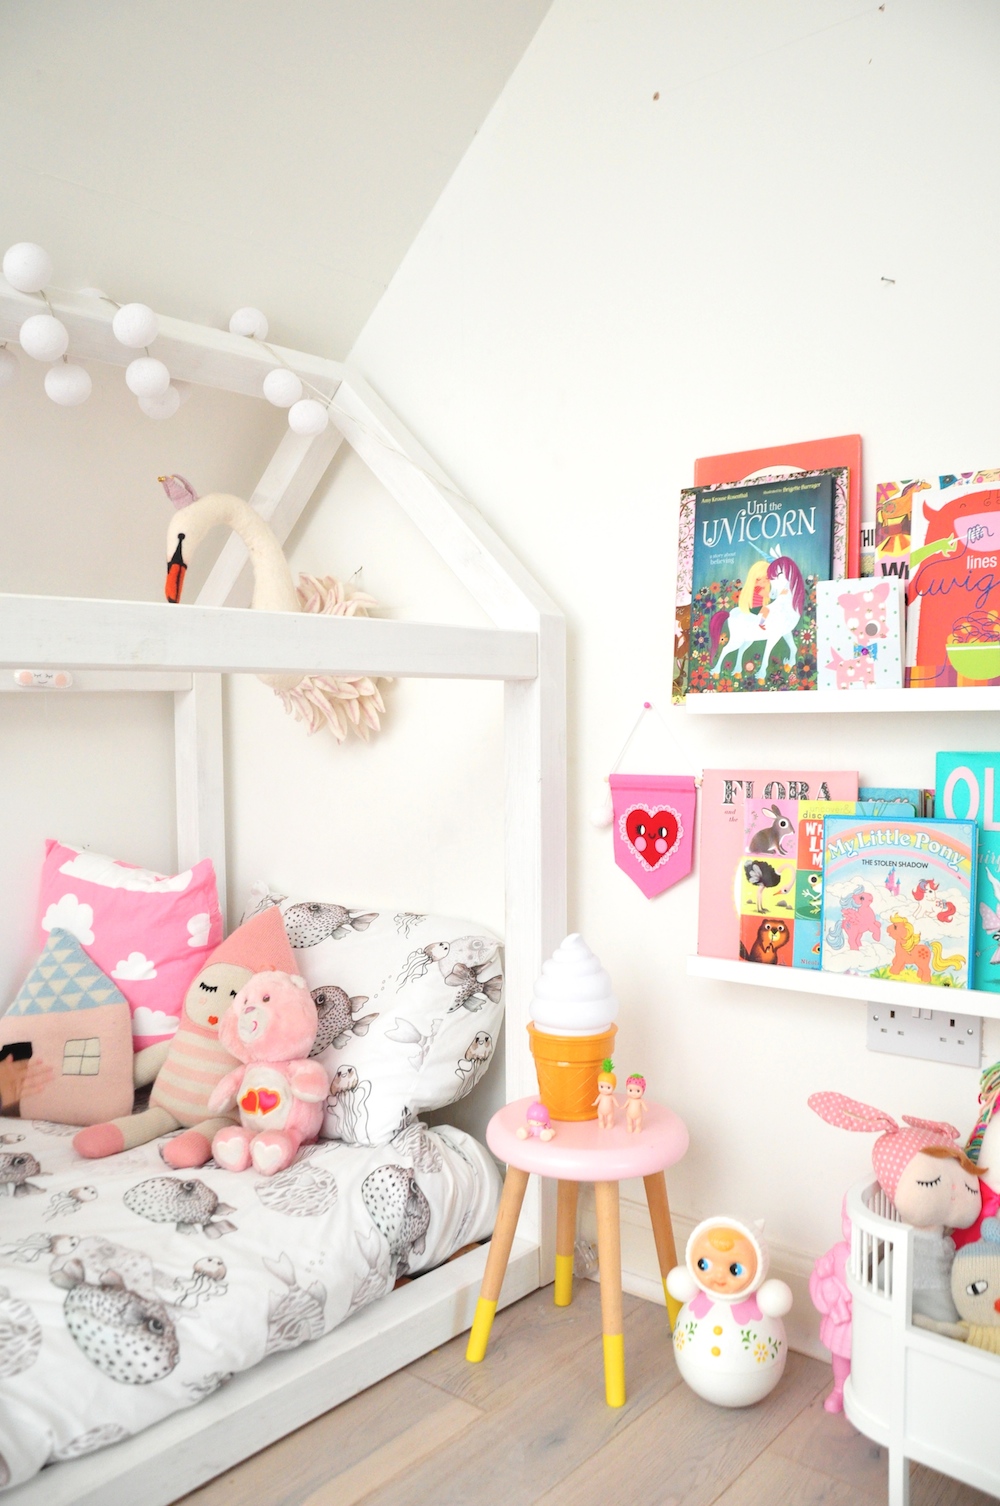 noodle_doll_nelly_banner_heart_girls_bedroom_house_bed